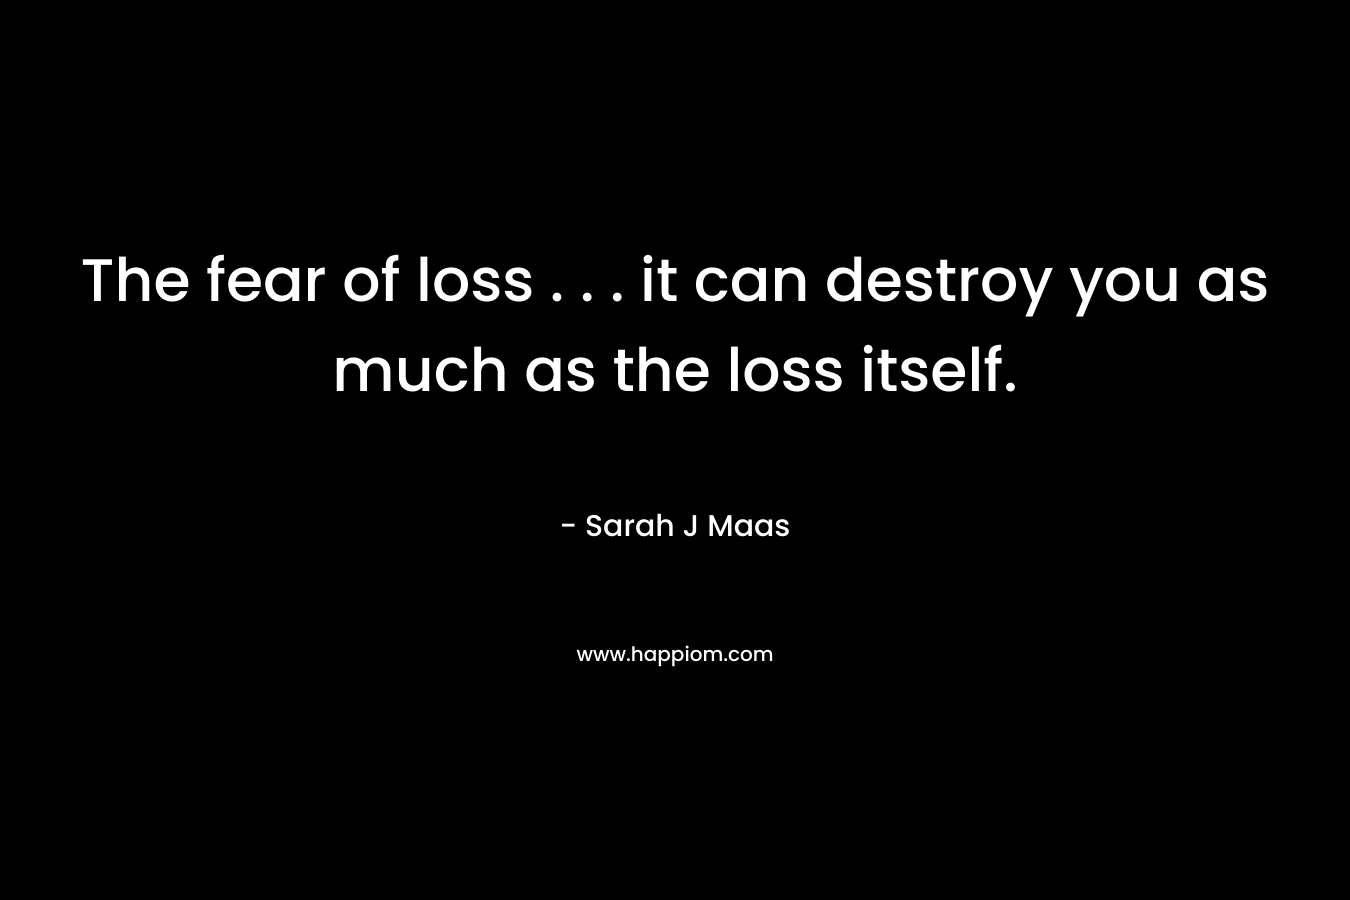 The fear of loss . . . it can destroy you as much as the loss itself.